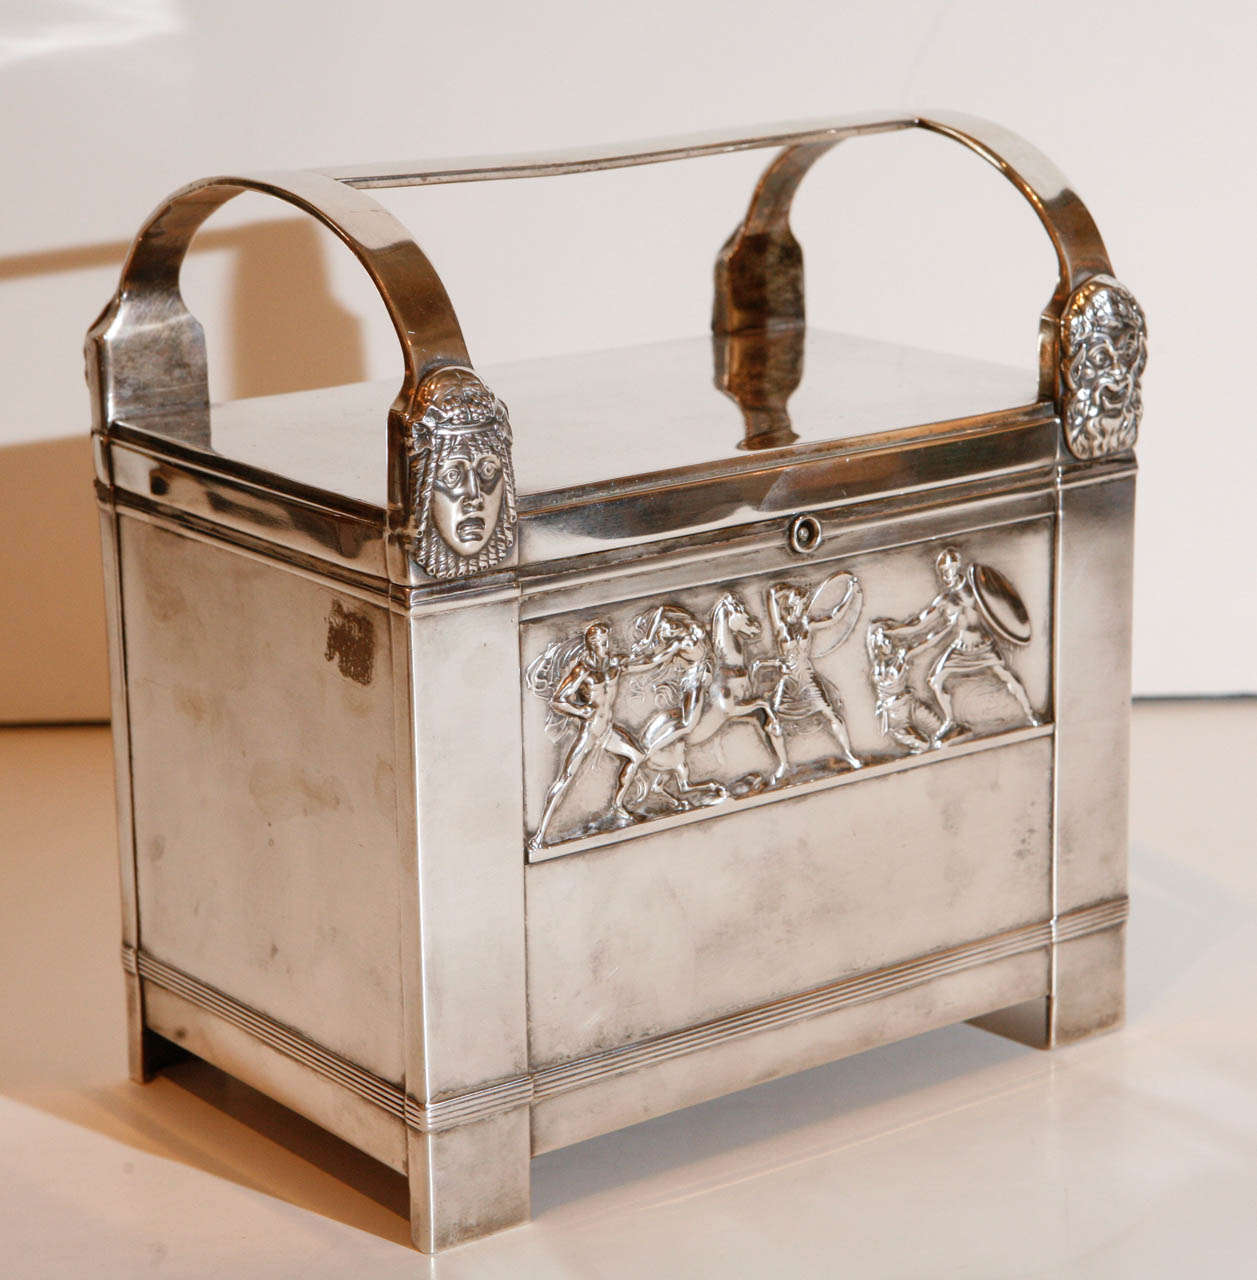 Silver plated, art-deco humidor featuring reproductions of the famous Bassae Frieze which depicts a battle between the Trojans and the Amazons.